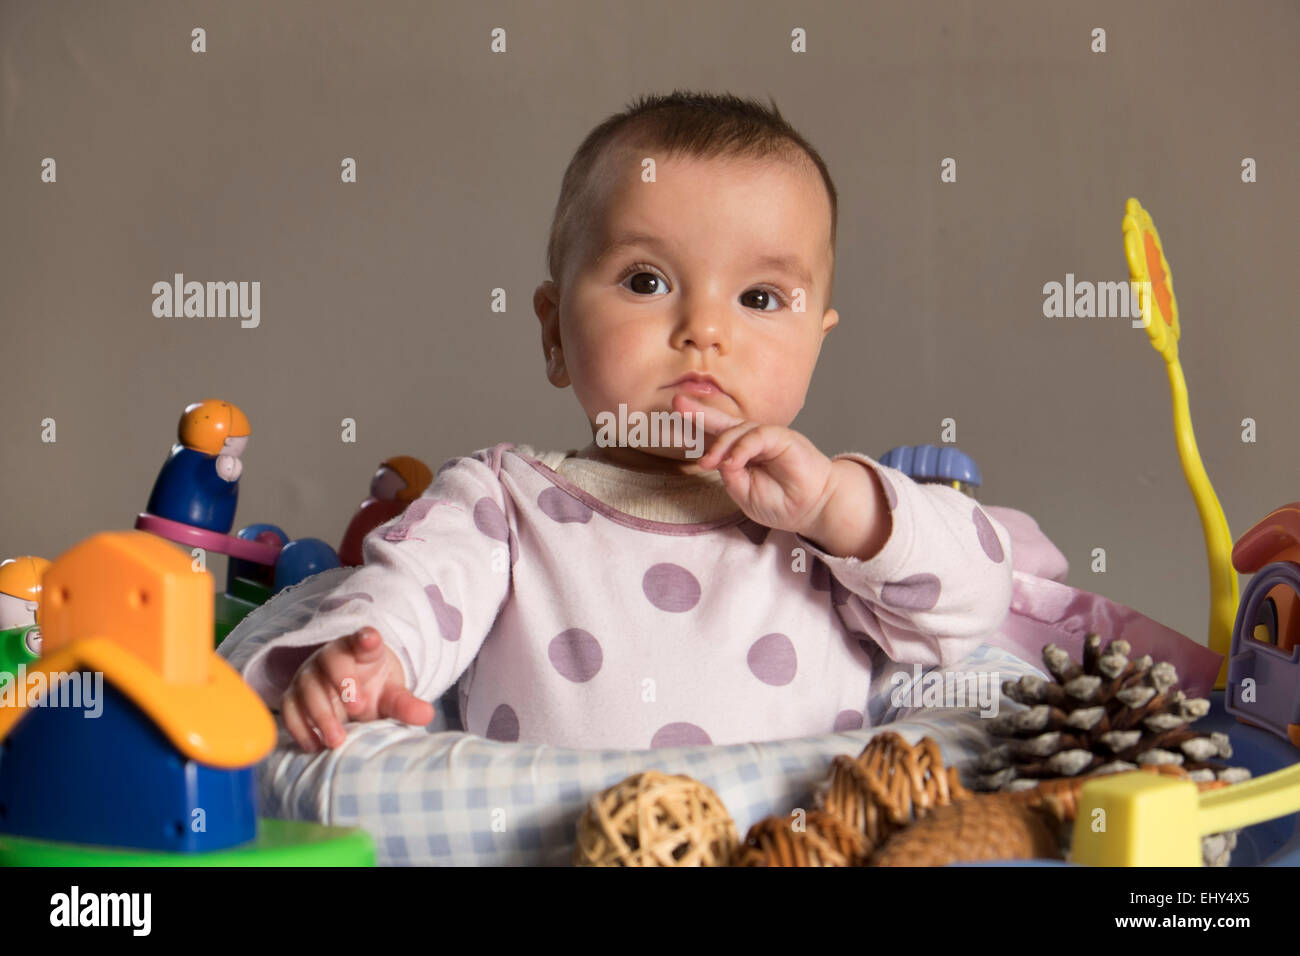 8 month old baby girl, surrounded by toys in baby bouncer Stock Photo